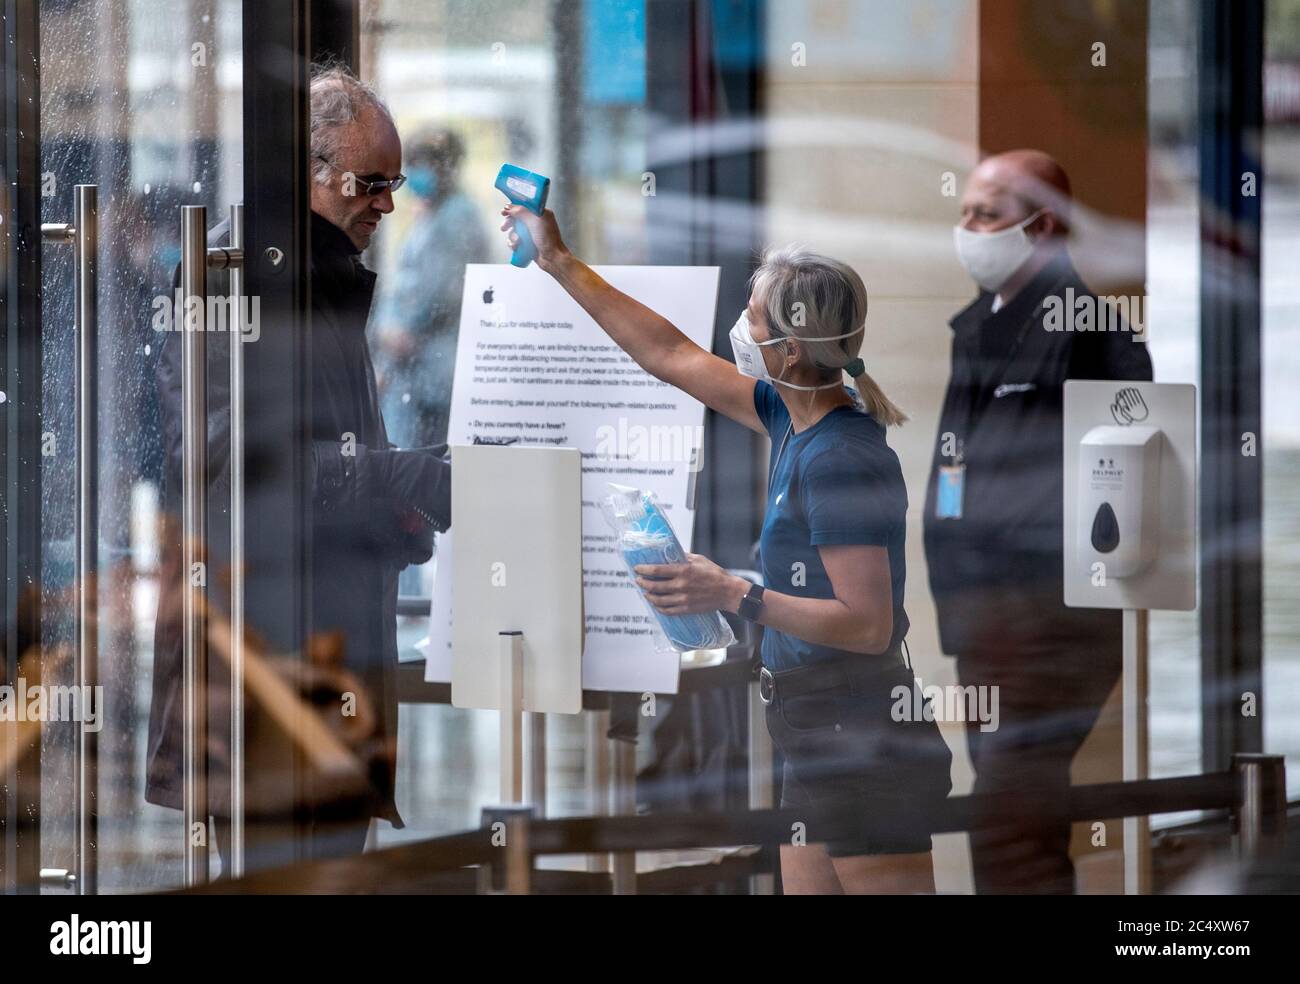 A member of staff at the Apple store in Edinburgh's Princes Street takes the temperature of a customer before entering as non-essential stores across the country reopen today as part of Scotland's phased plan to ease out of the coronavirus pandemic lockdown. Stock Photo